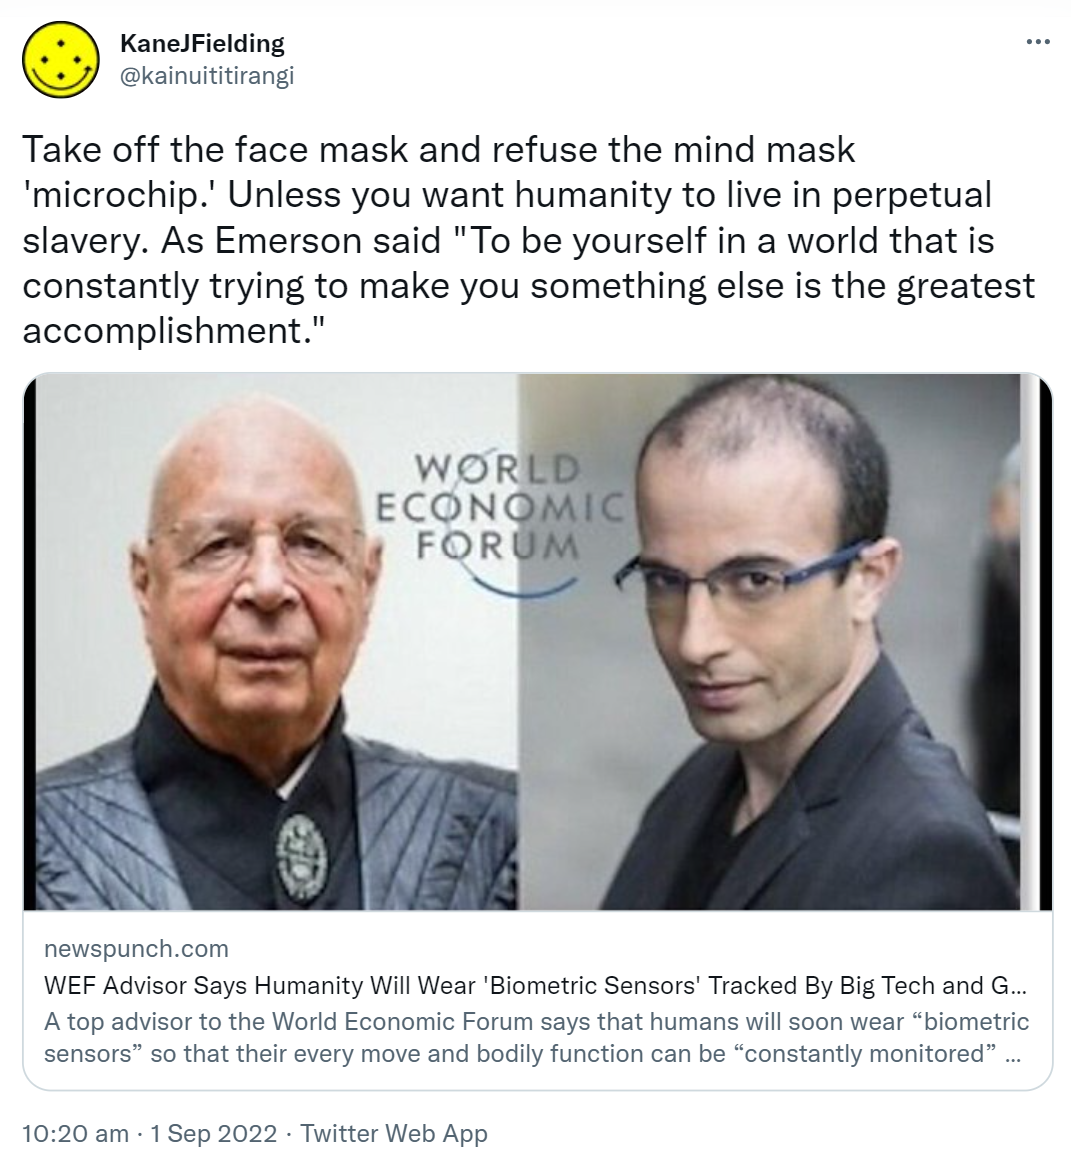 Take off the face mask and refuse the mind mask 'microchip.' Unless you want humanity to live in perpetual slavery. As Emerson said, To be yourself in a world that is constantly trying to make you something else is the greatest accomplishment. Newspunch.com. WEF Advisor Says Humanity Will Wear 'Biometric Sensors' Tracked By Big Tech and Government. A top advisor to the World Economic Forum says that humans will soon wear biometric sensors so that their every move and bodily function can be constantly monitored by government and Big Tech. 10:20 am · 1 Sep 2022.